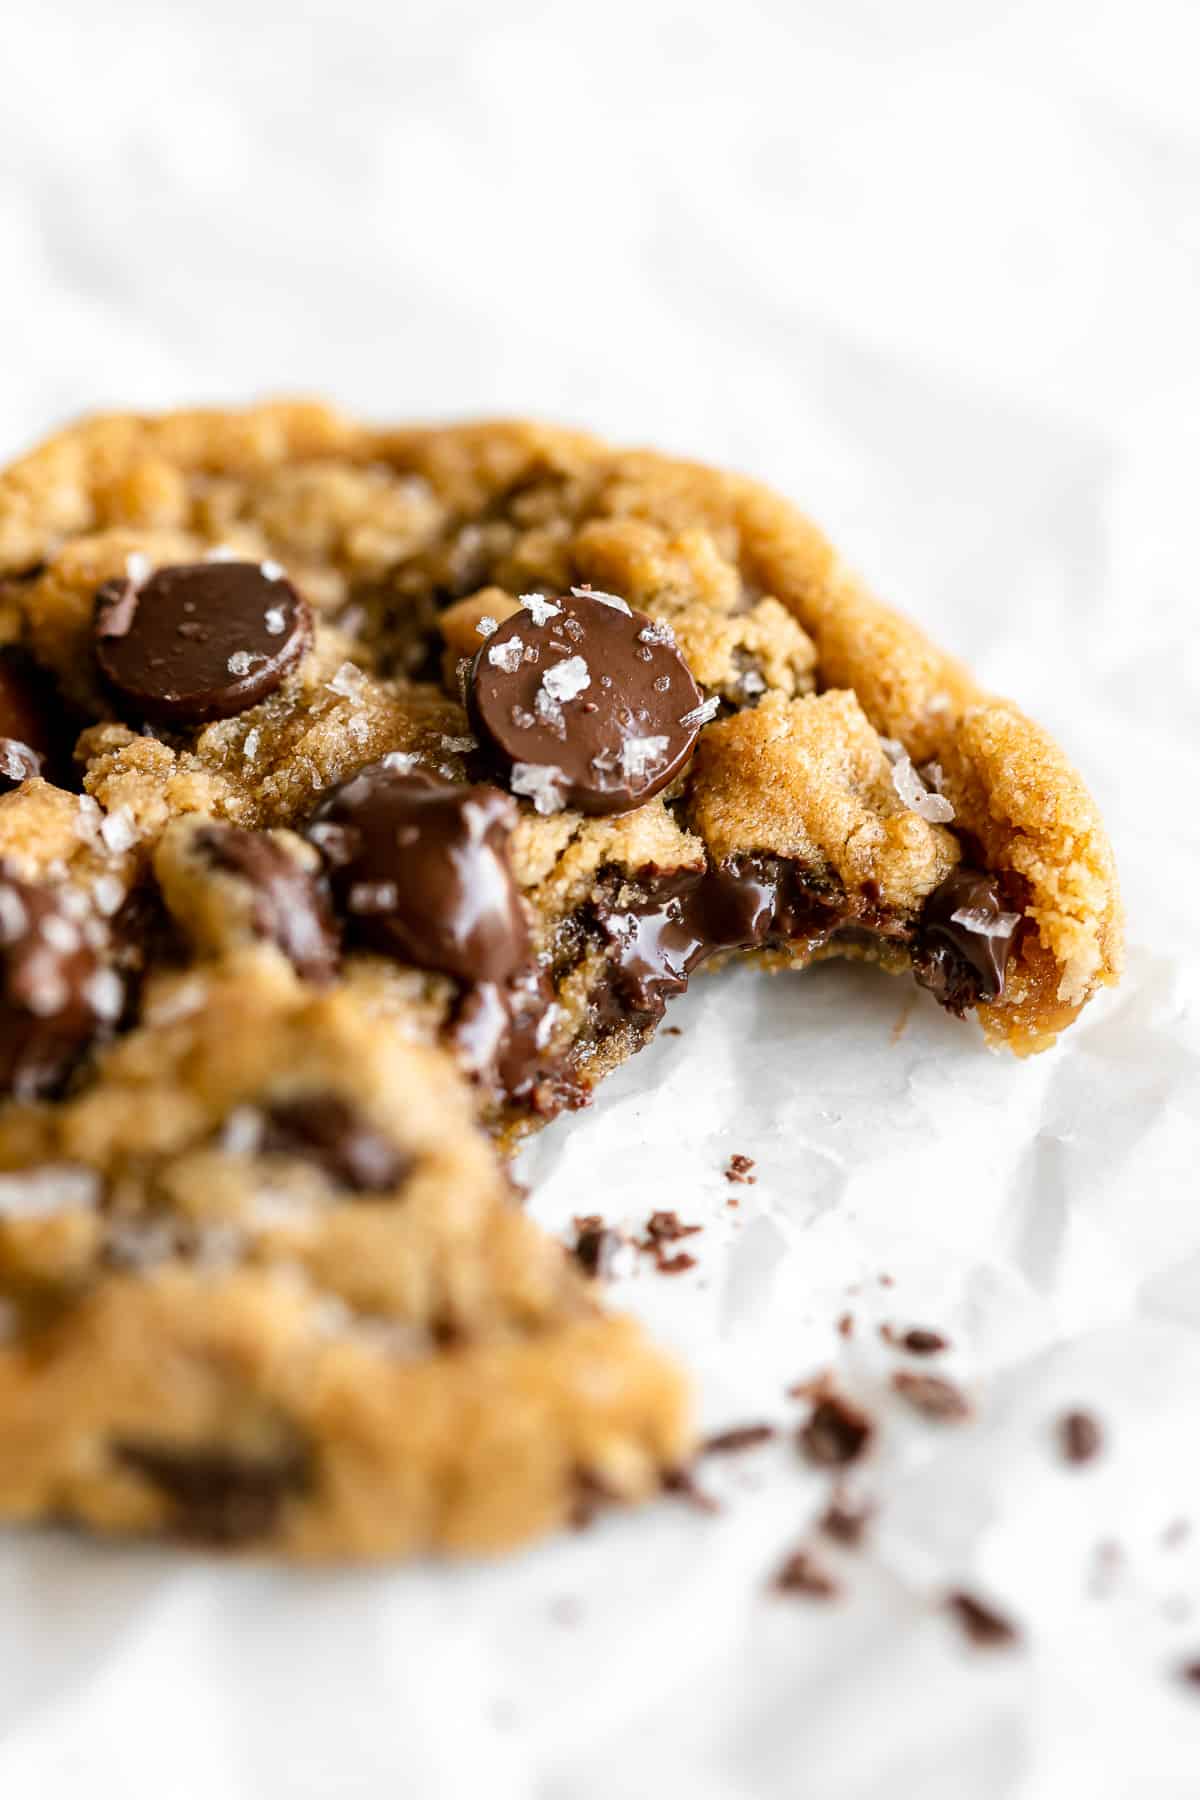 up close image of the small batch chocolate chip cookies with melted chocolate